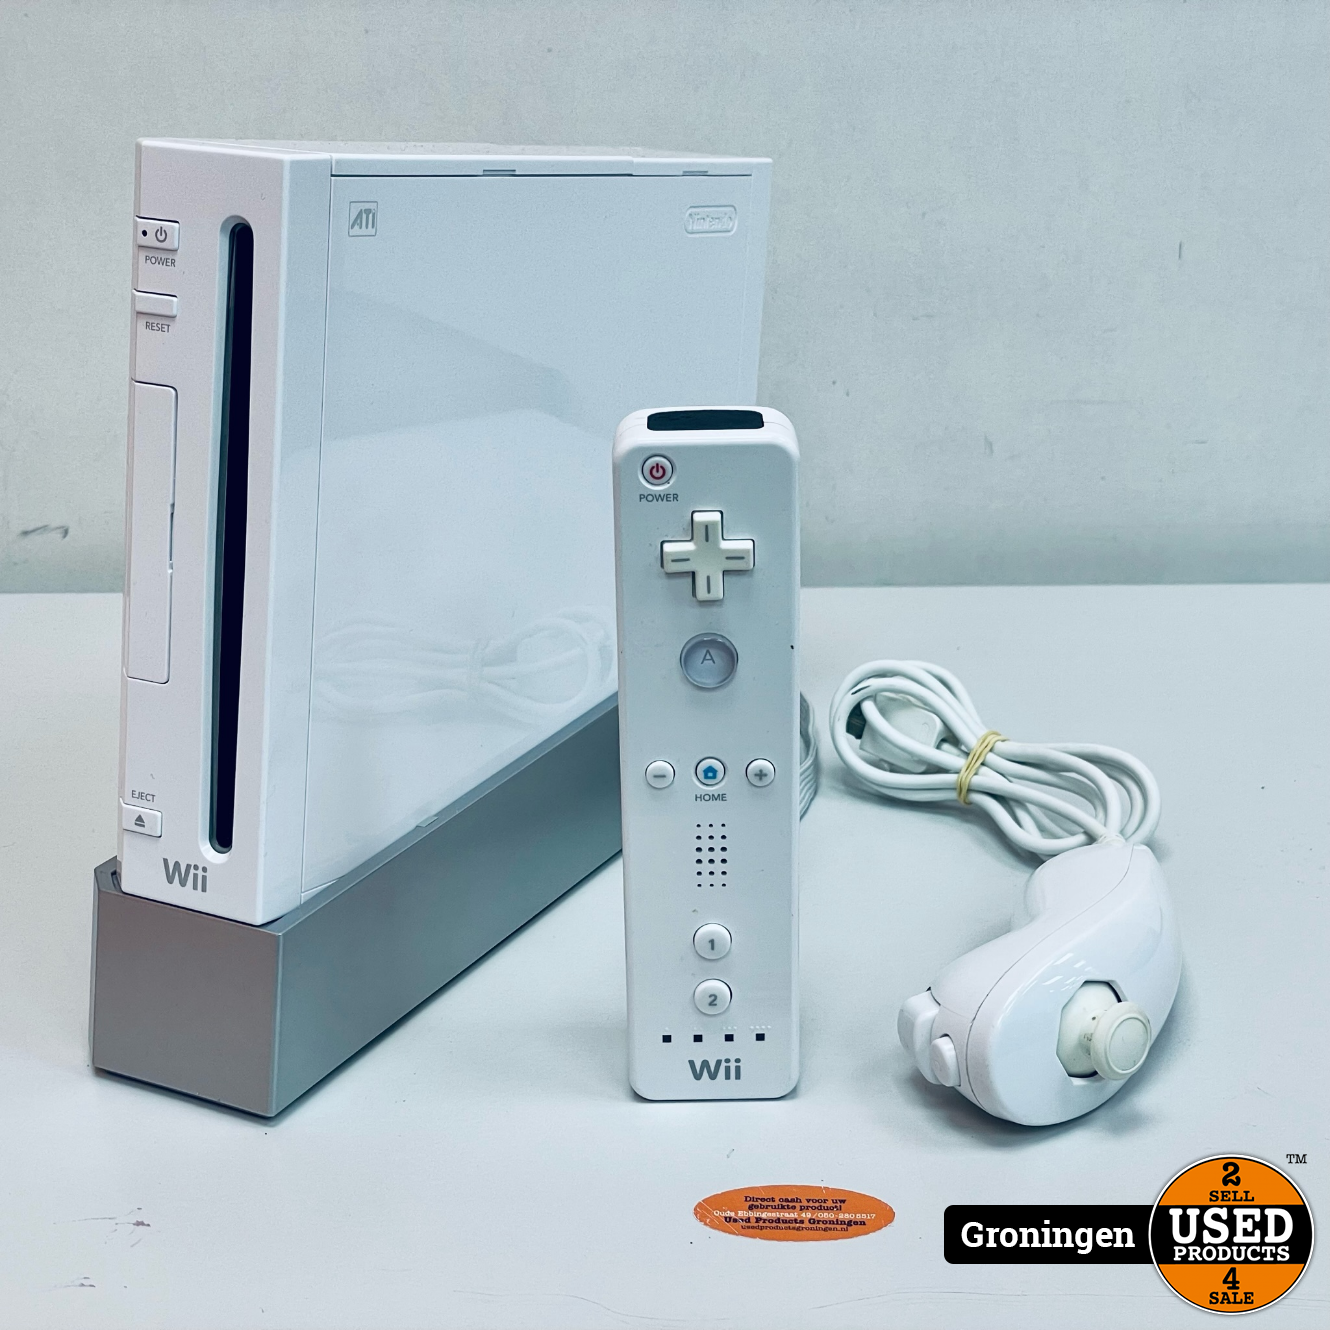 Wii] Nintendo Wii Console White | incl. Wii Remote + NunChuck en - Products